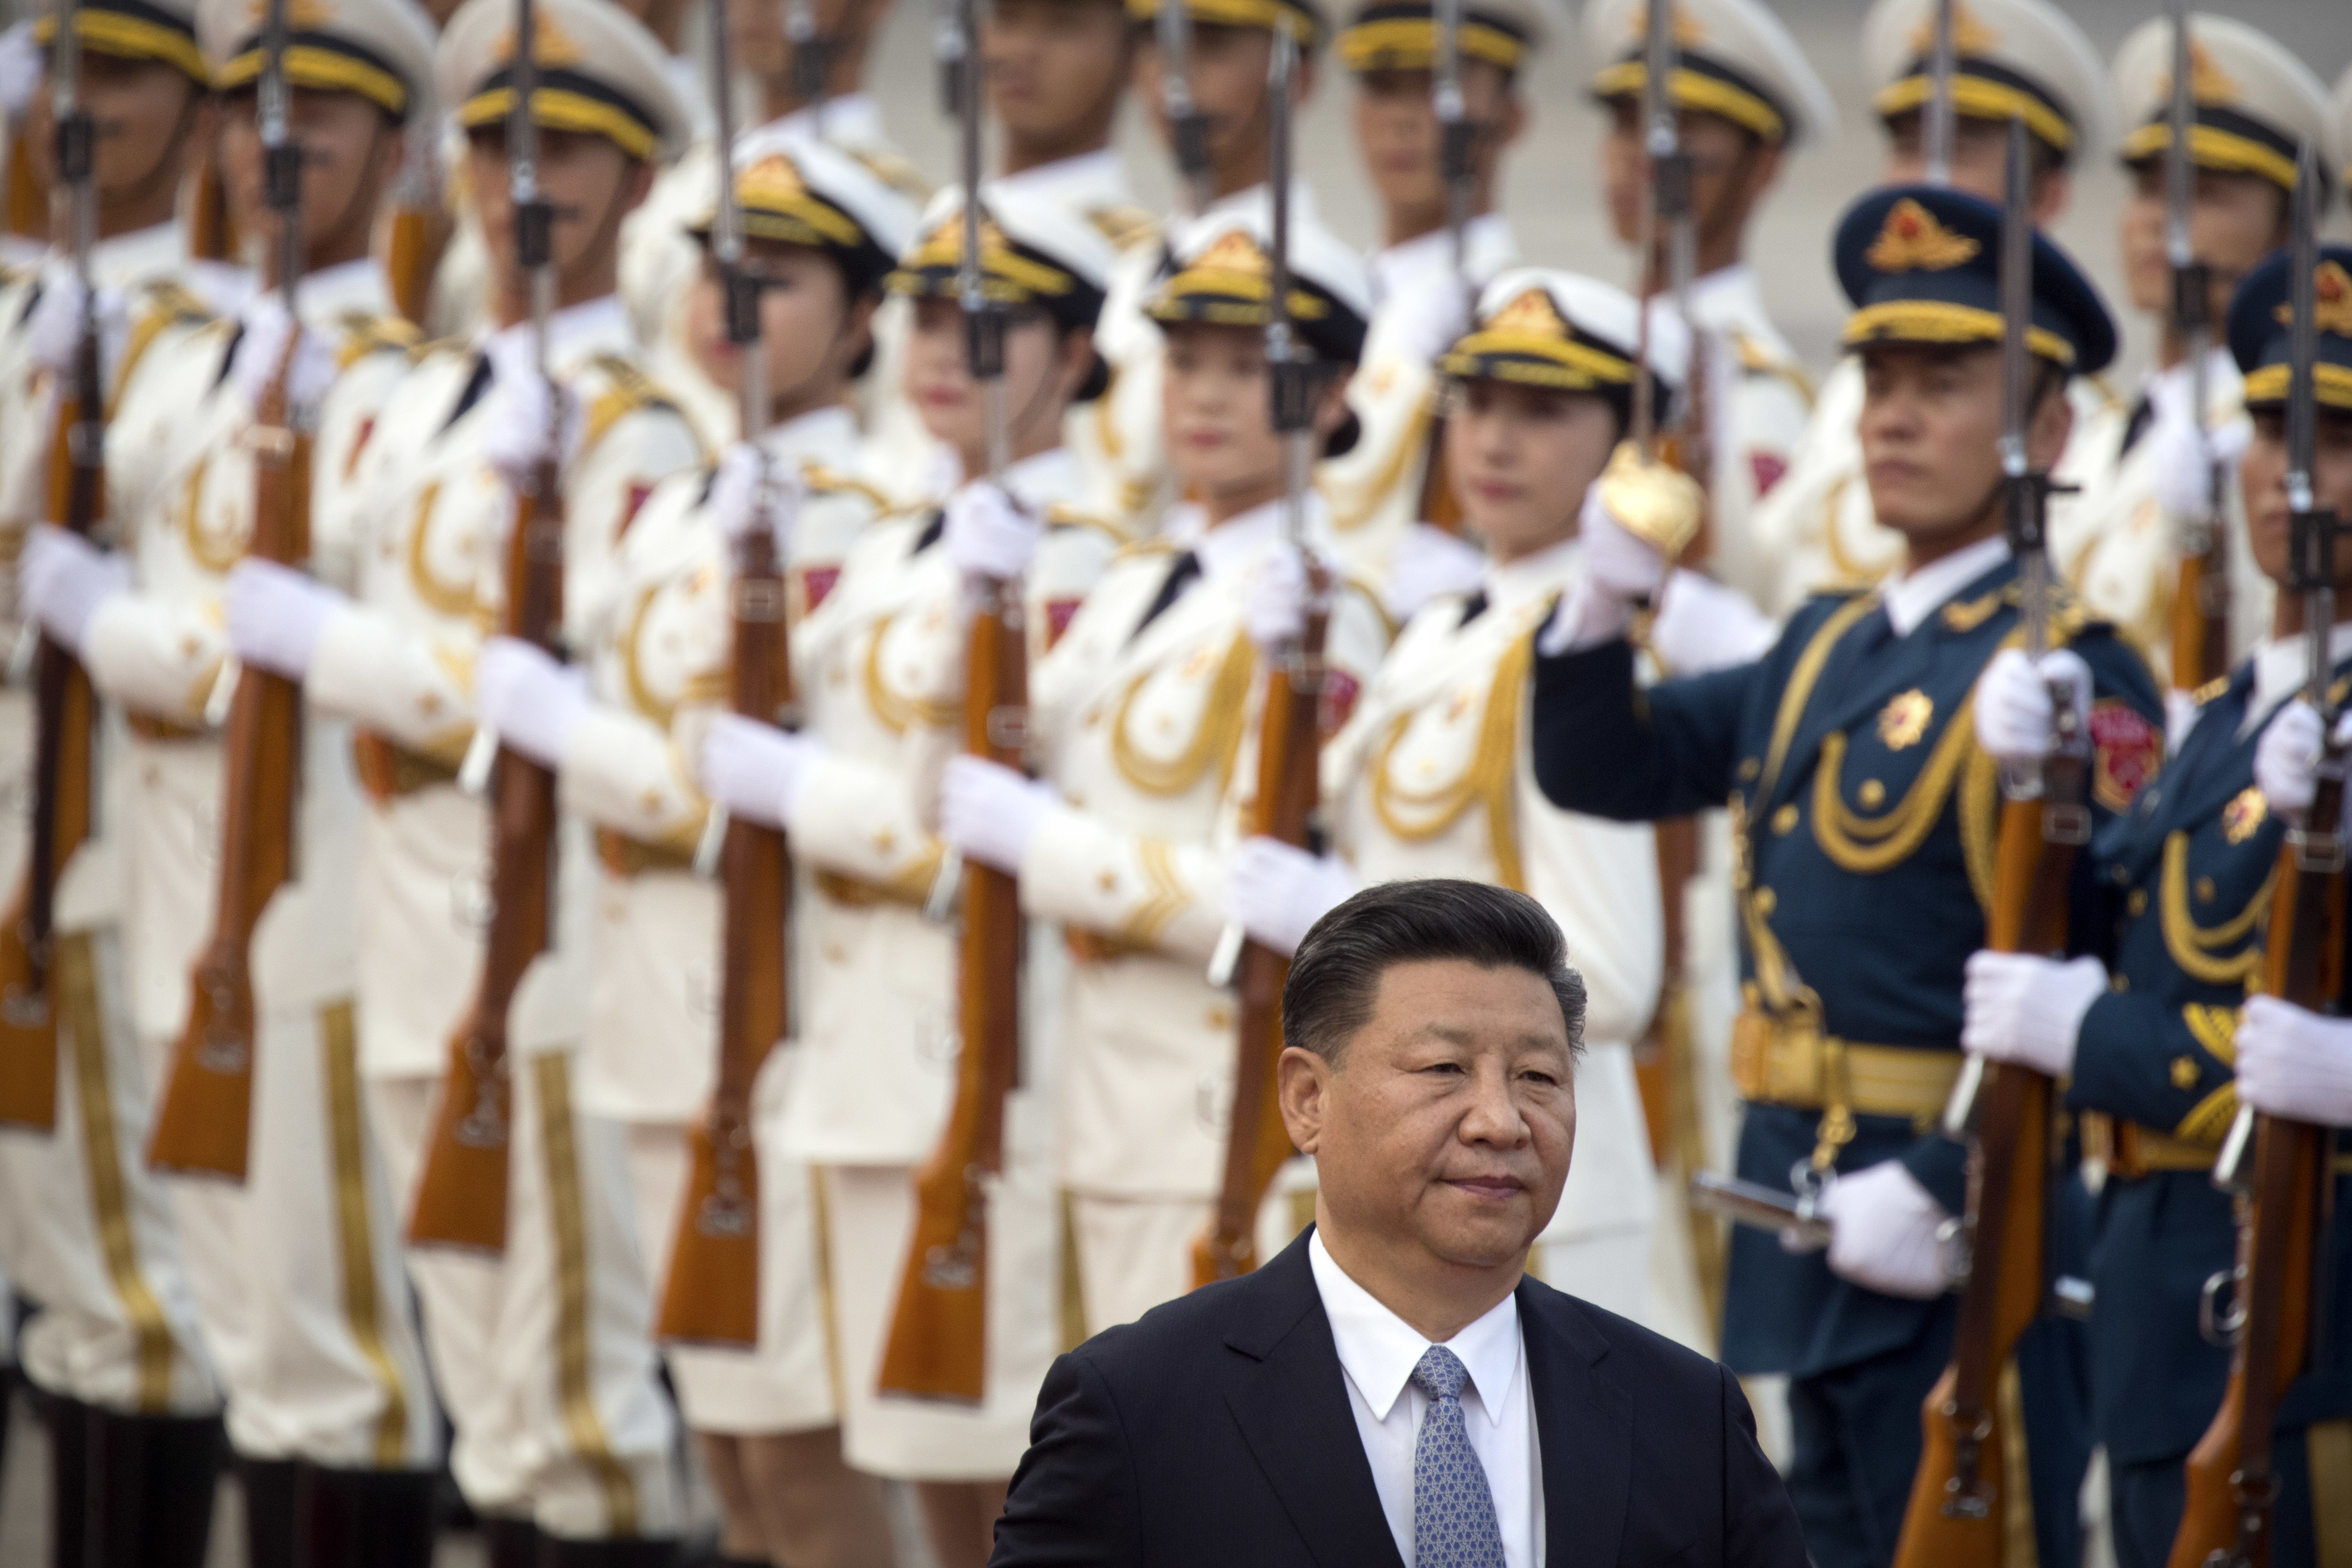 Chinese President Xi Jinping reviews an honor guard during a welcome ceremony at the Great Hall of the People in Beijing, Tuesday, July 18, 2017. (AP Photo/Mark Schiefelbein)